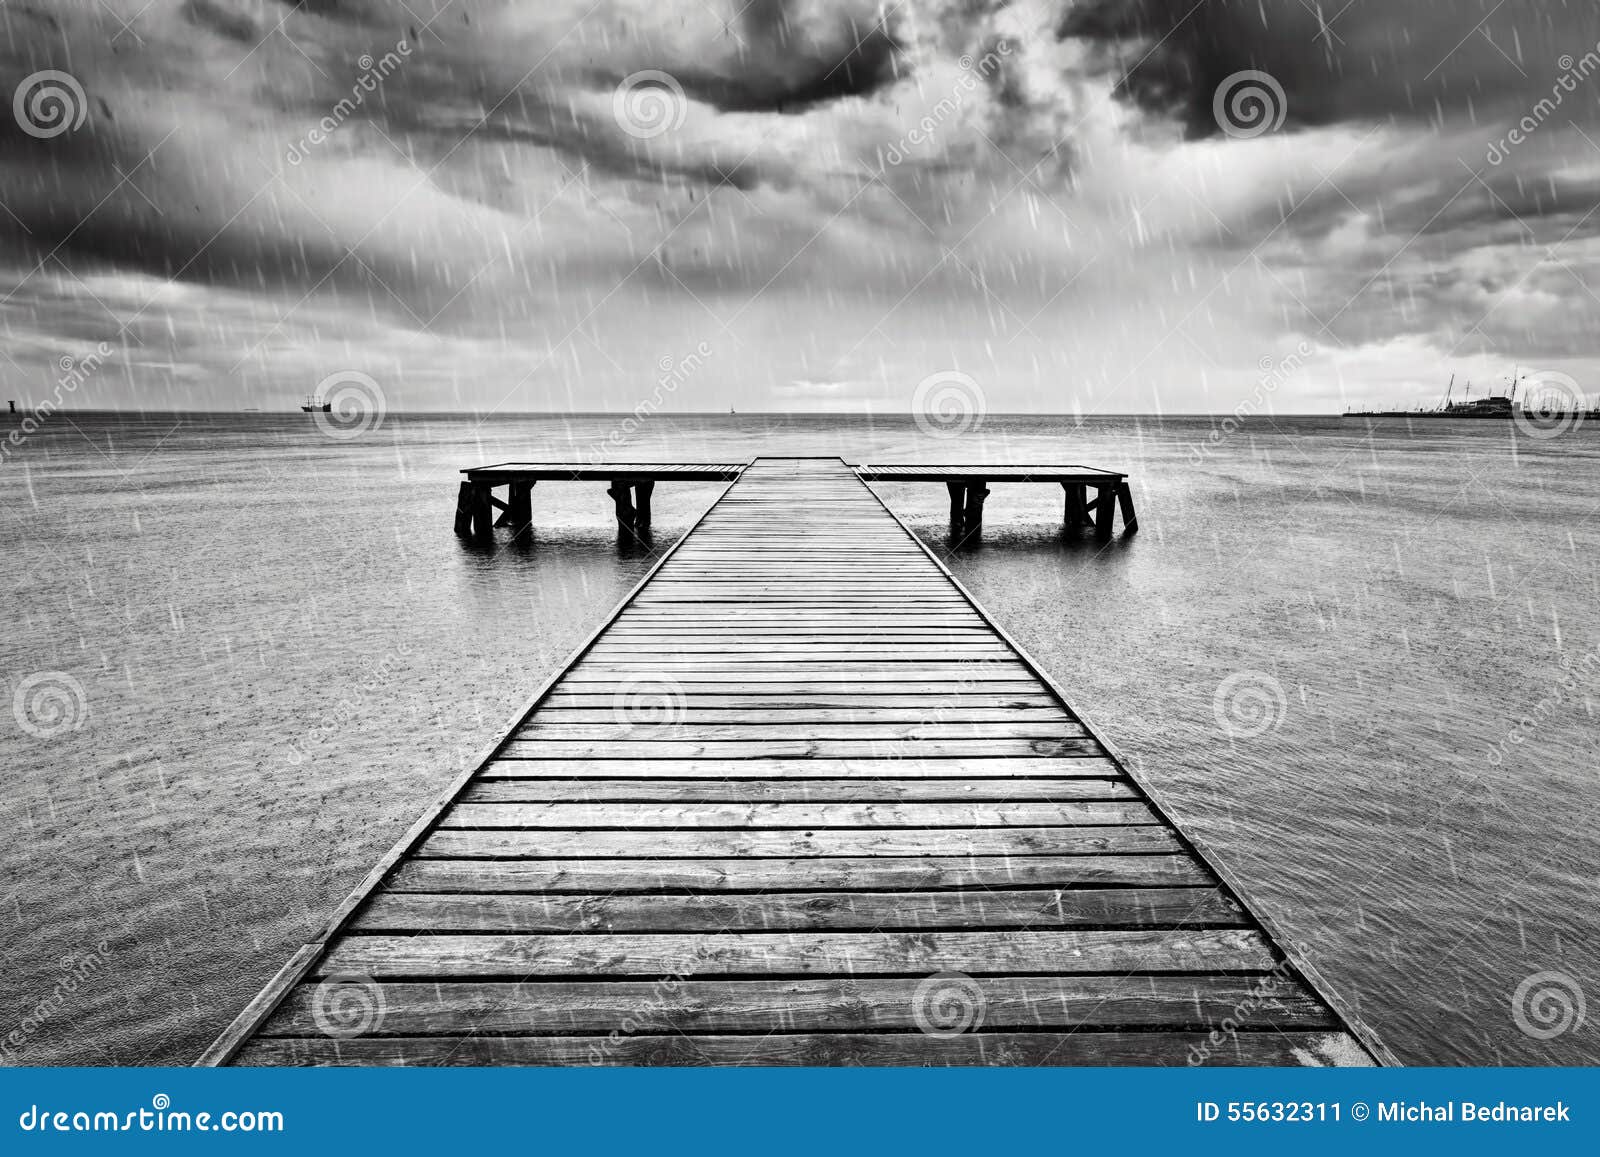 old jetty, pier on the sea. black and white, rain.